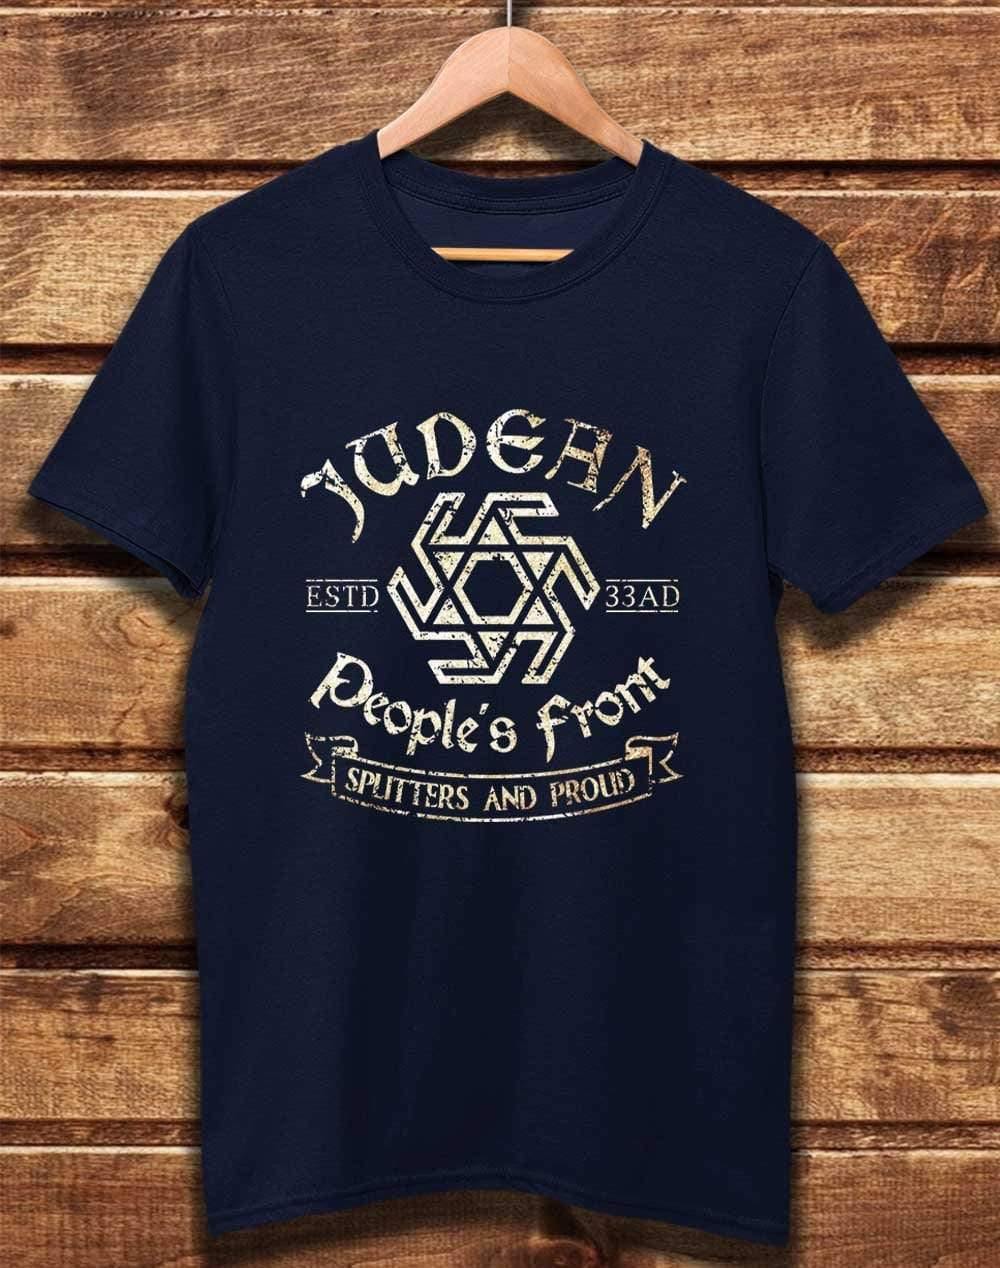 DELUXE Judean People's Front Organic Cotton T-Shirt XS / Navy  - Off World Tees